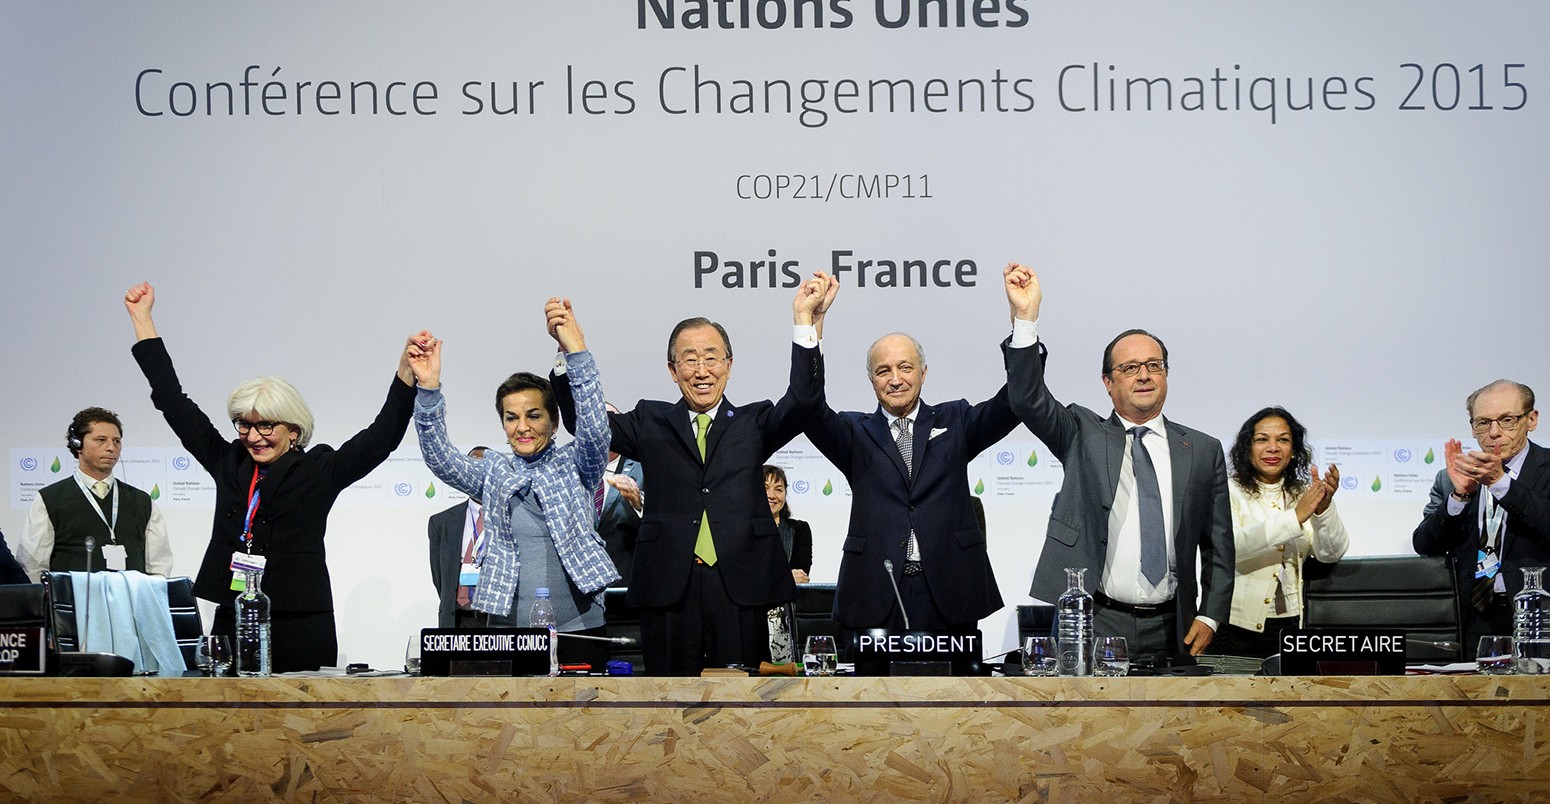 Laurence Tubiana, Christiana Figueres, Ban Ki-moon, Laurent Fabius & Francois Hollande celebrate the successful end of the COP21 Paris Climate Conference.